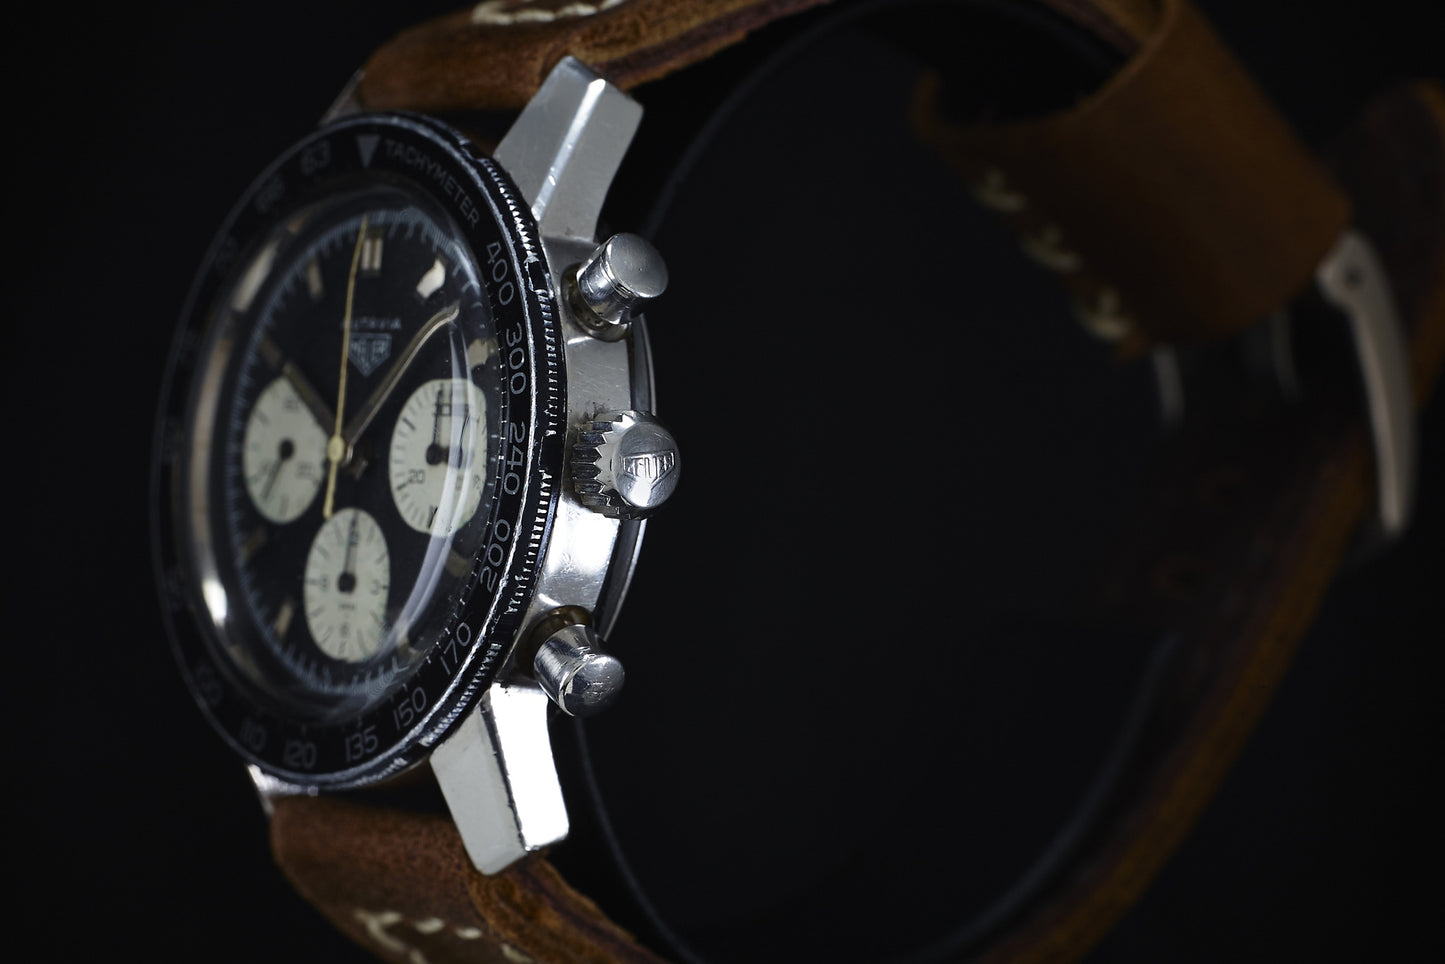 Heuer Autavia 2446C Chronograph - Presented in Collaboration with Gear Patrol!